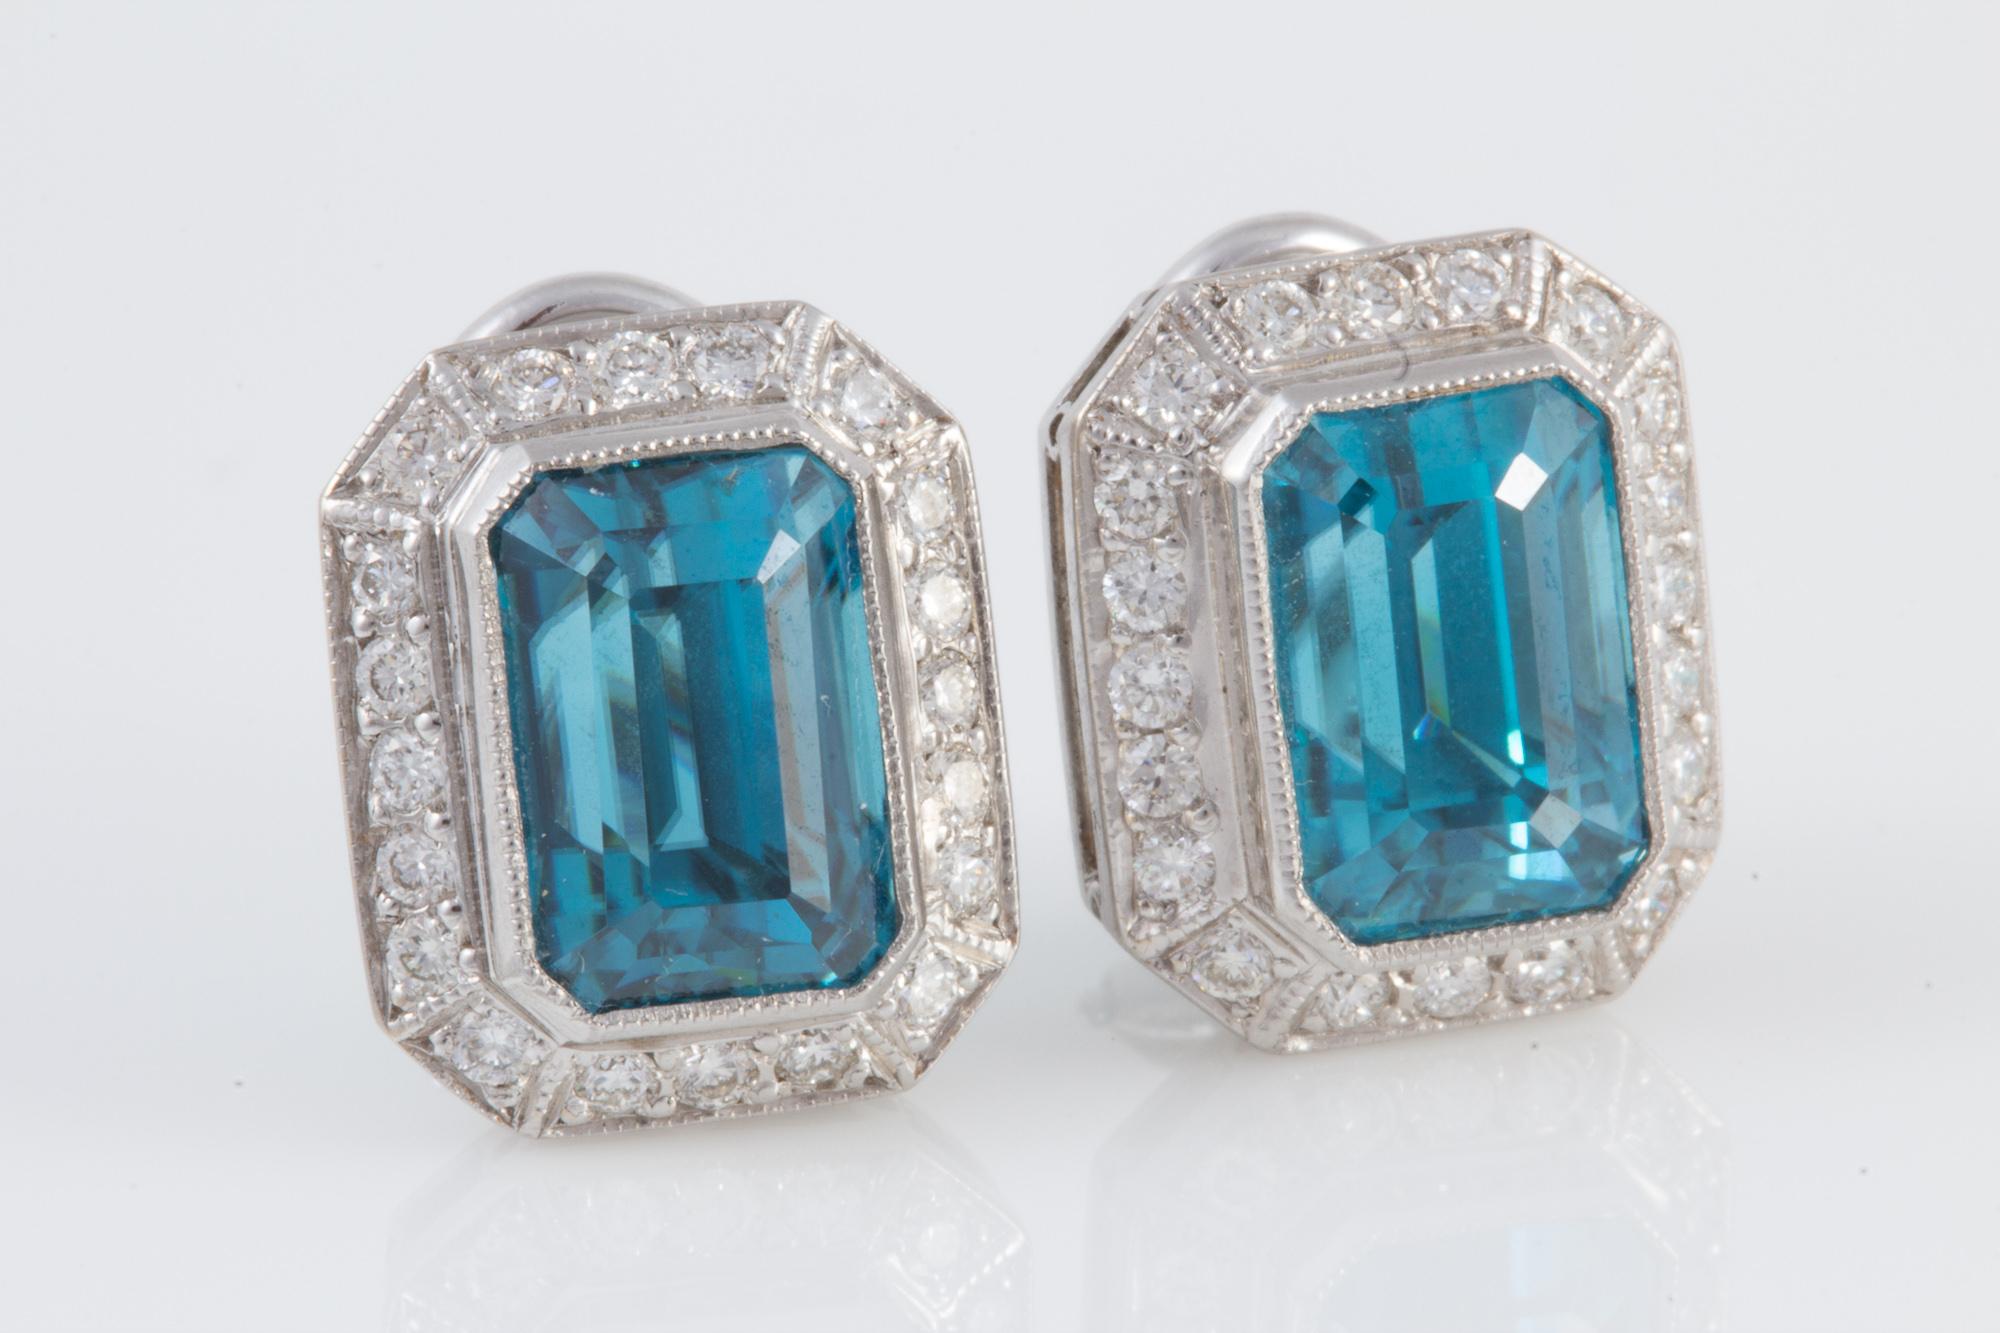 Cambodian Blue Zircon and Diamond Earrings Set in 18 Karat Gold and Platinum For Sale 2